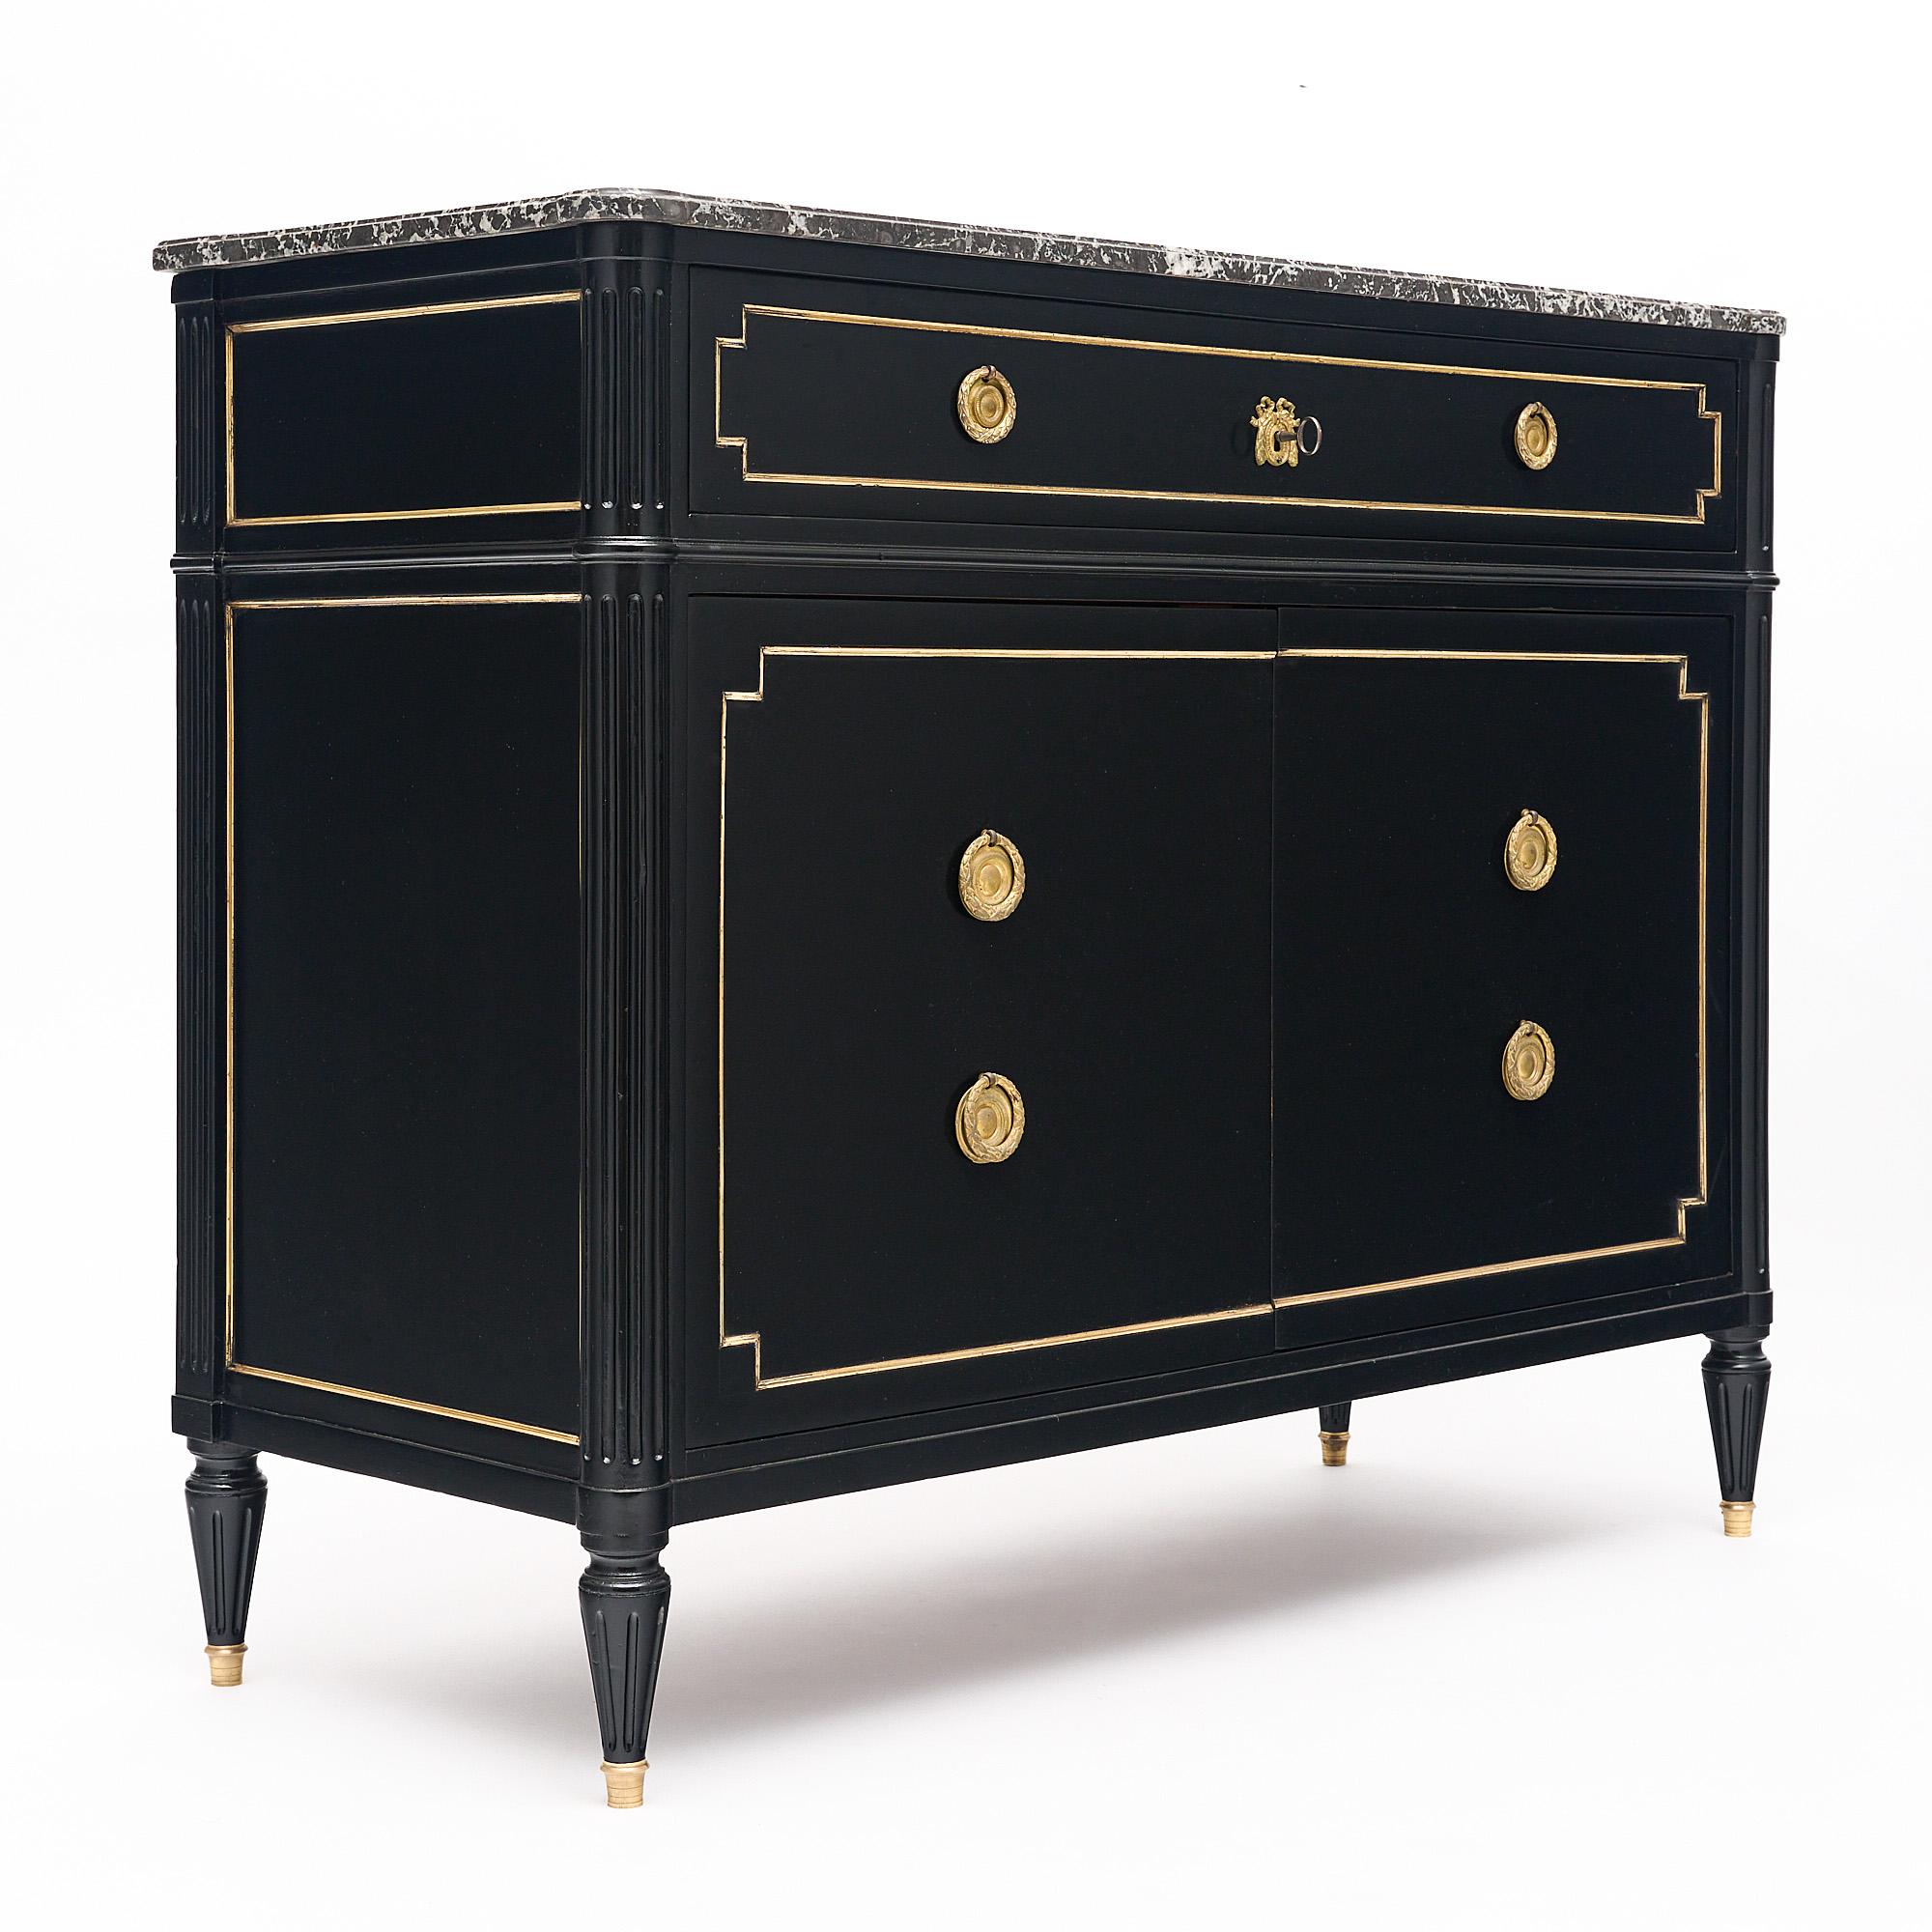 Scriban or secretary chest in the Louis XVI style from France. This piece is made of mahogany that has been ebonized and finished with a lustrous French polish. There are two doors that open to interior drawers. The top fake drawer drops down to